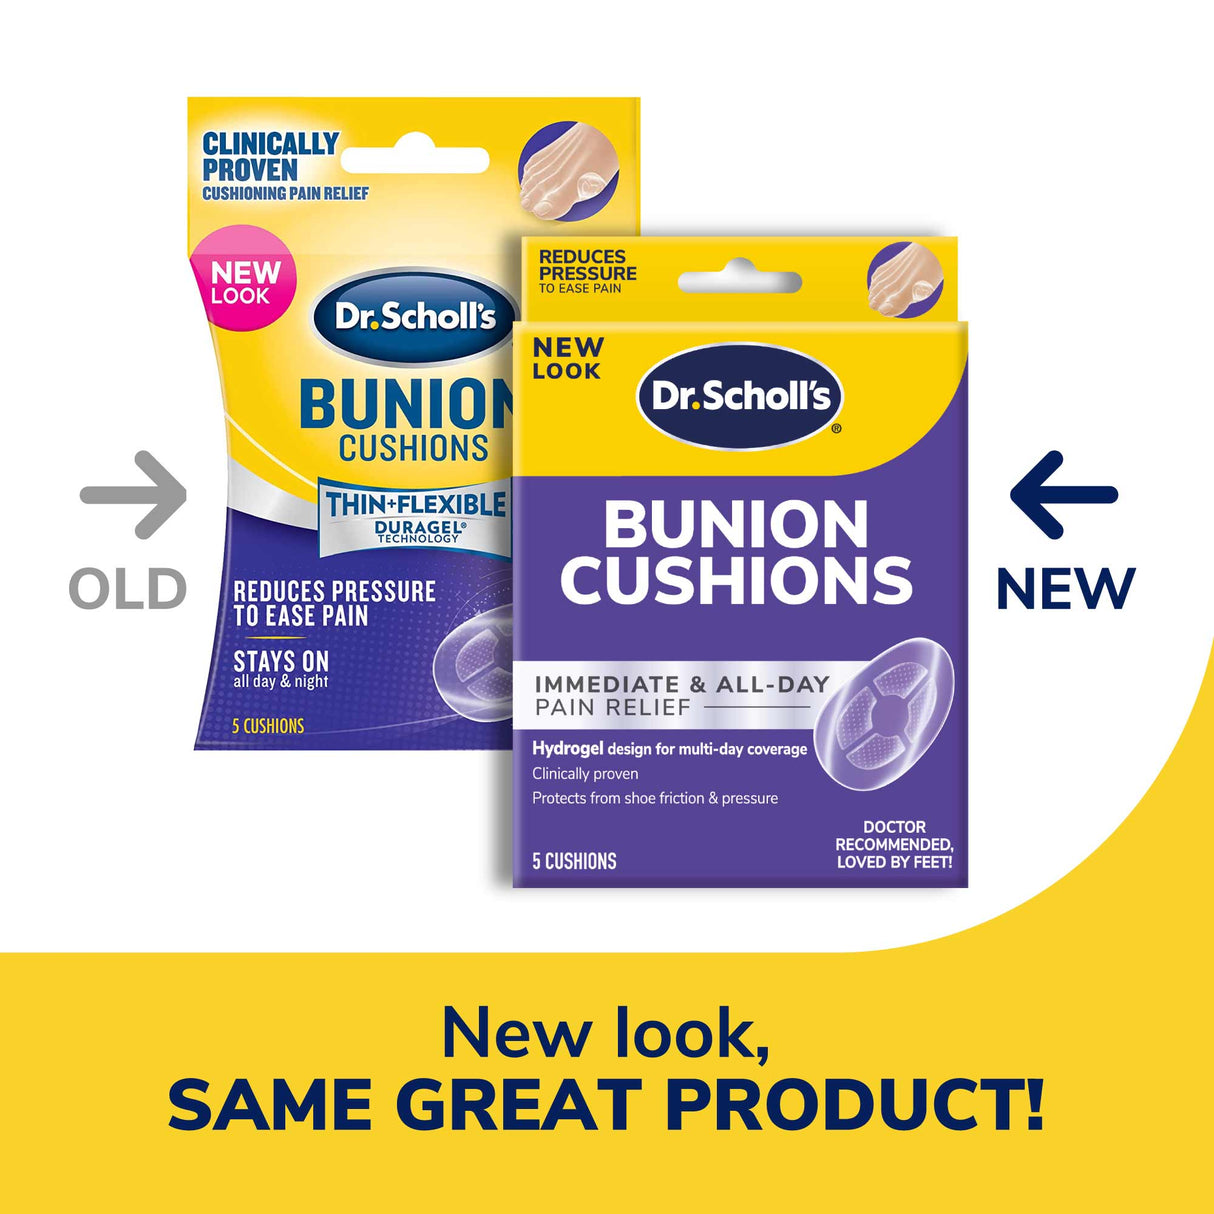 image of old packaging and new packaging of the bunion cushions